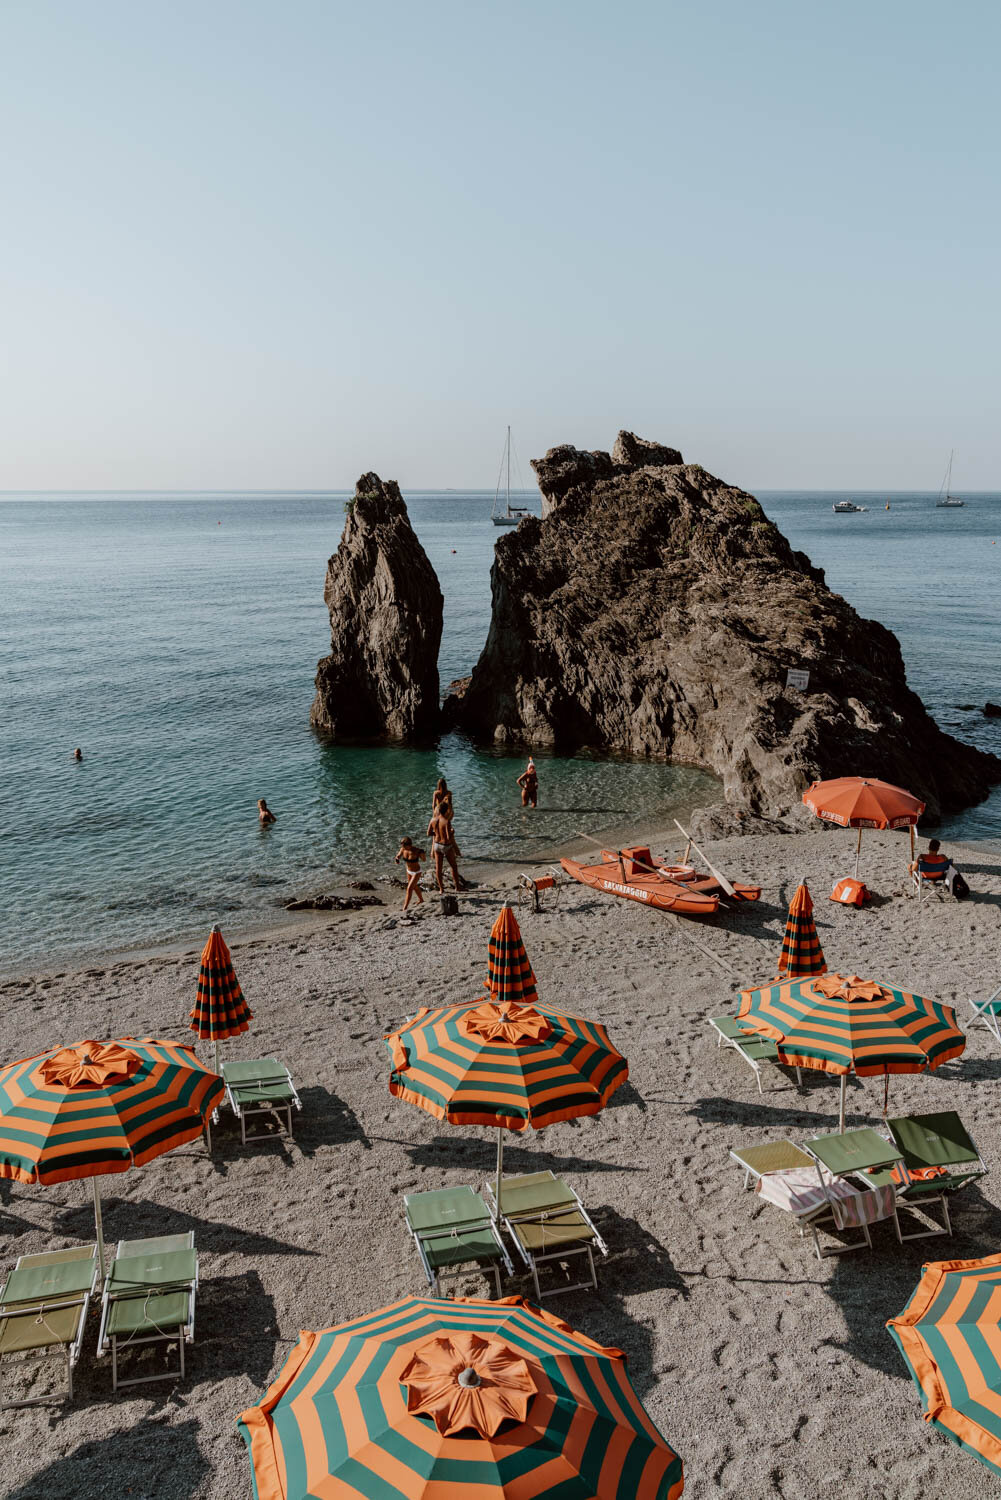 The famous rock formation and beach in Monterosso